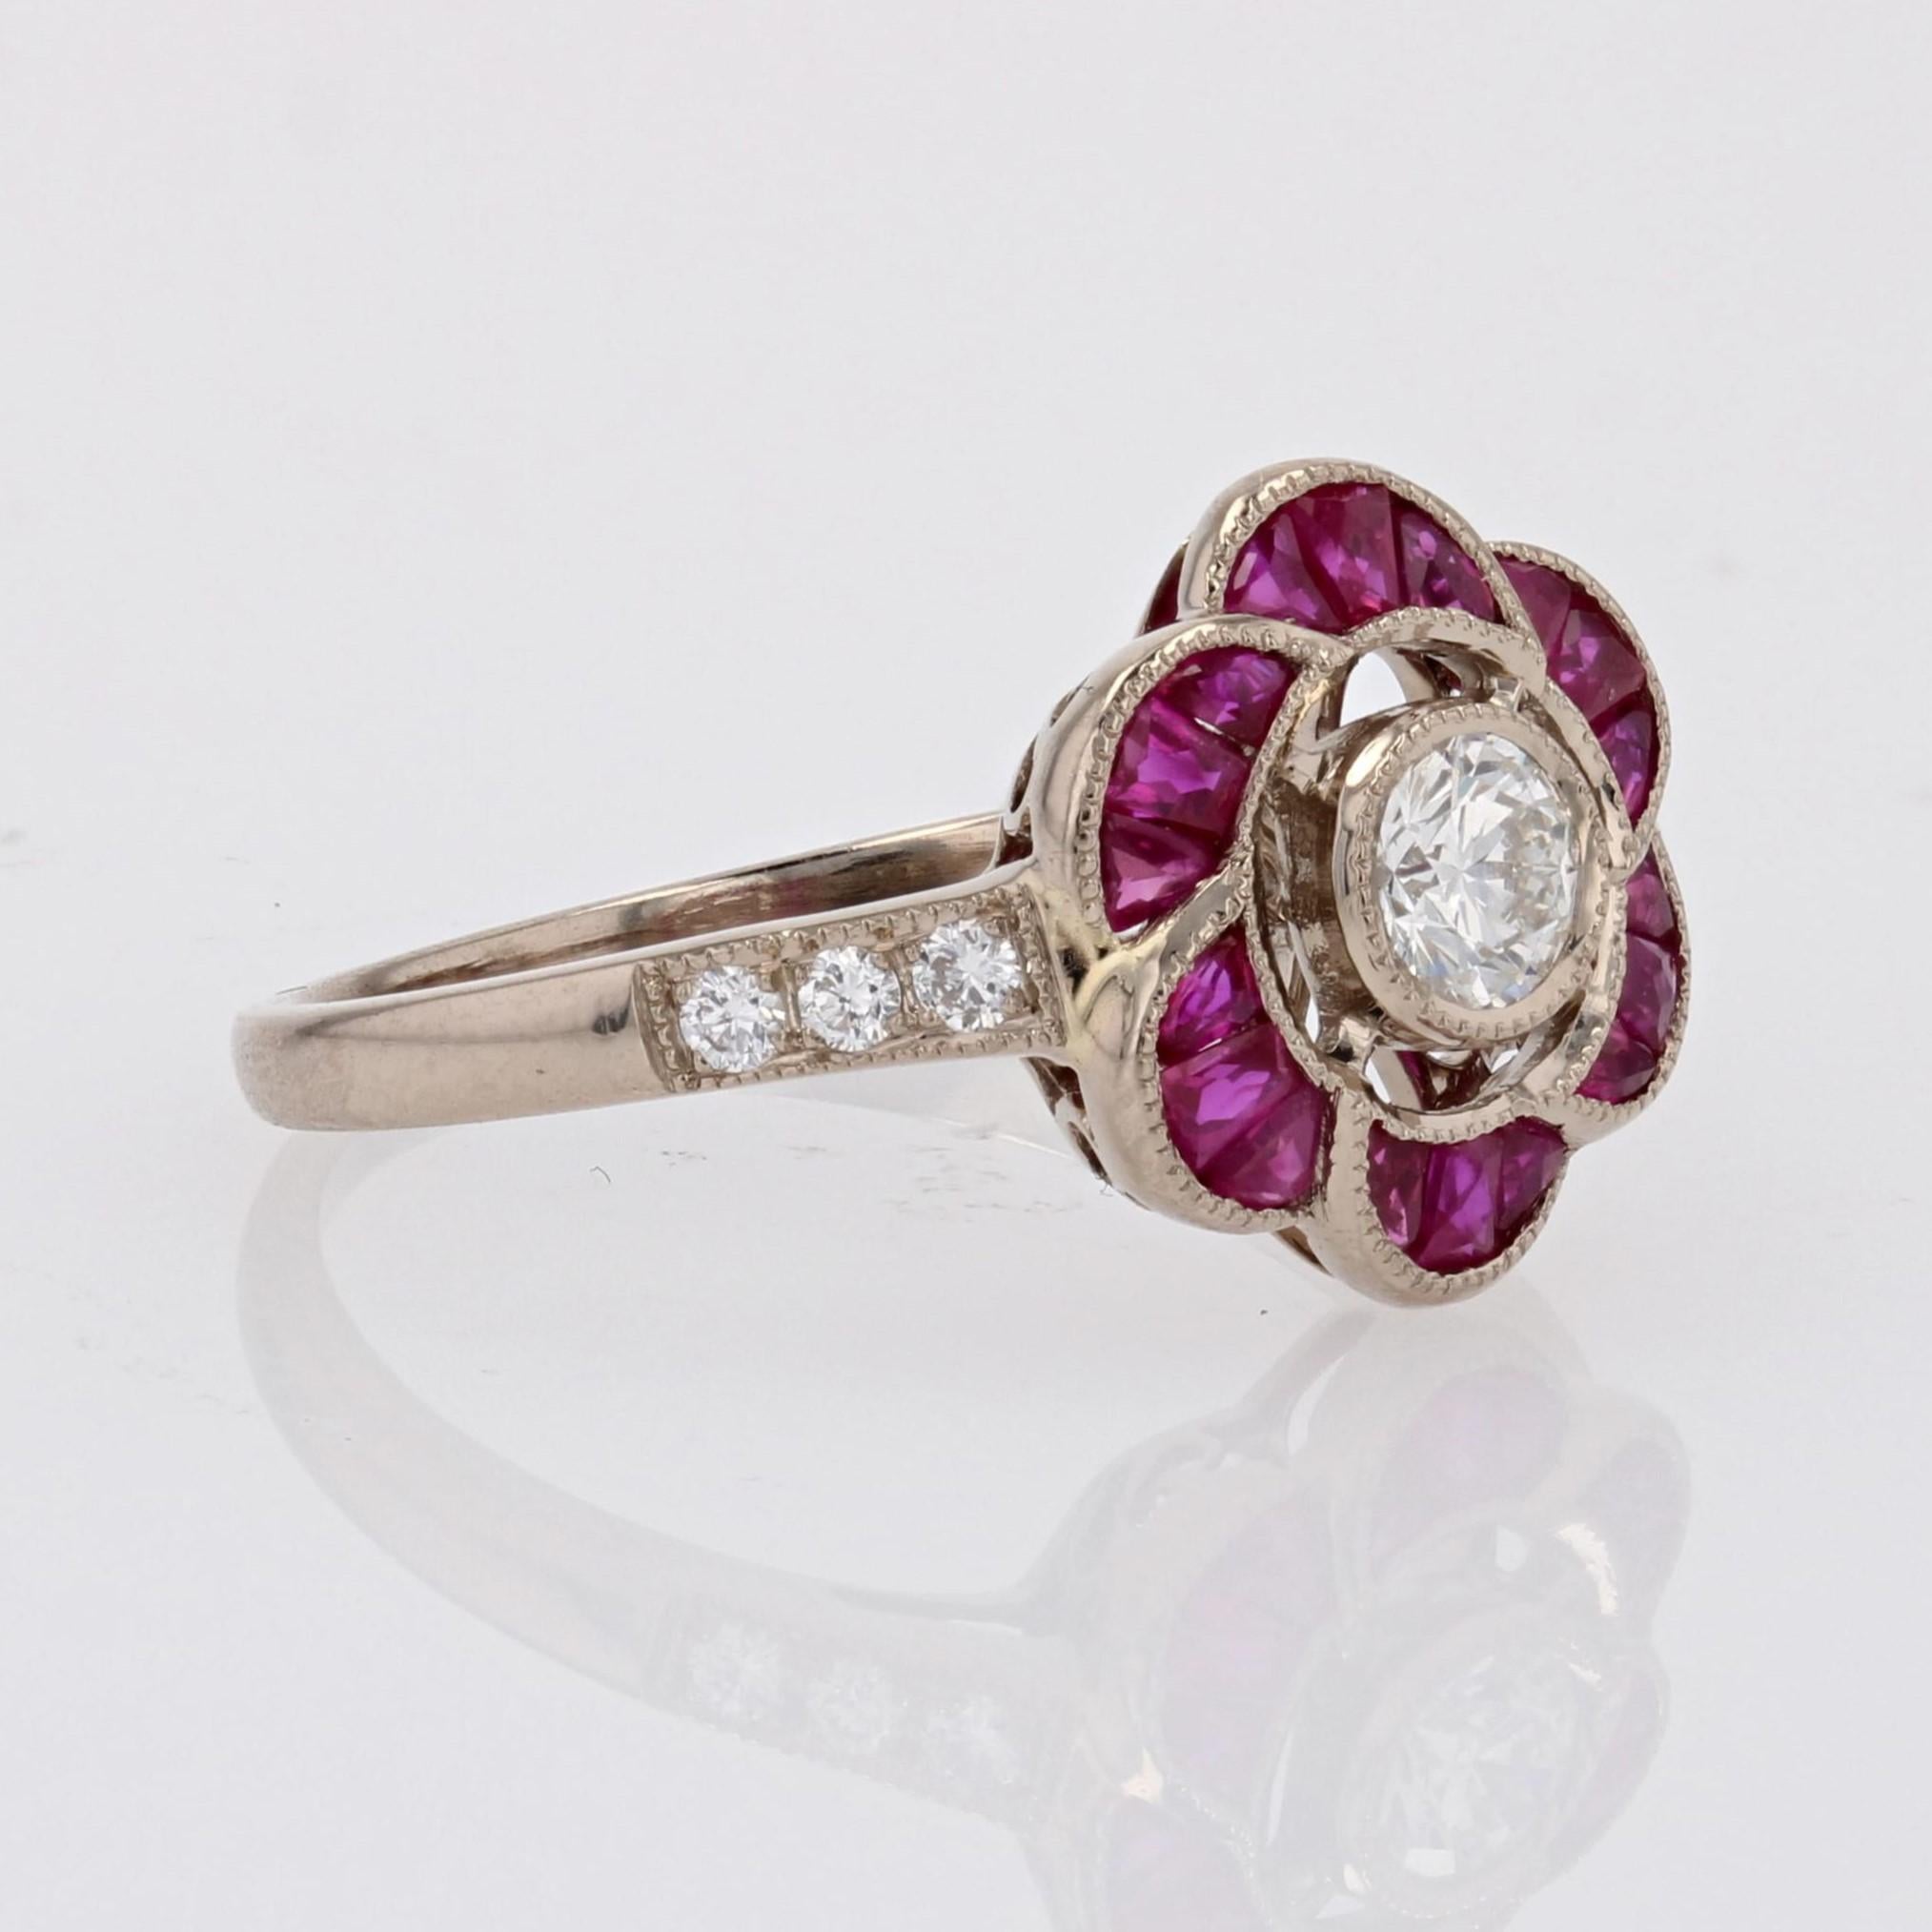 New Art Deco Style Calibrated Rubies Diamonds 18 Karat White Gold Flower Ring For Sale 6